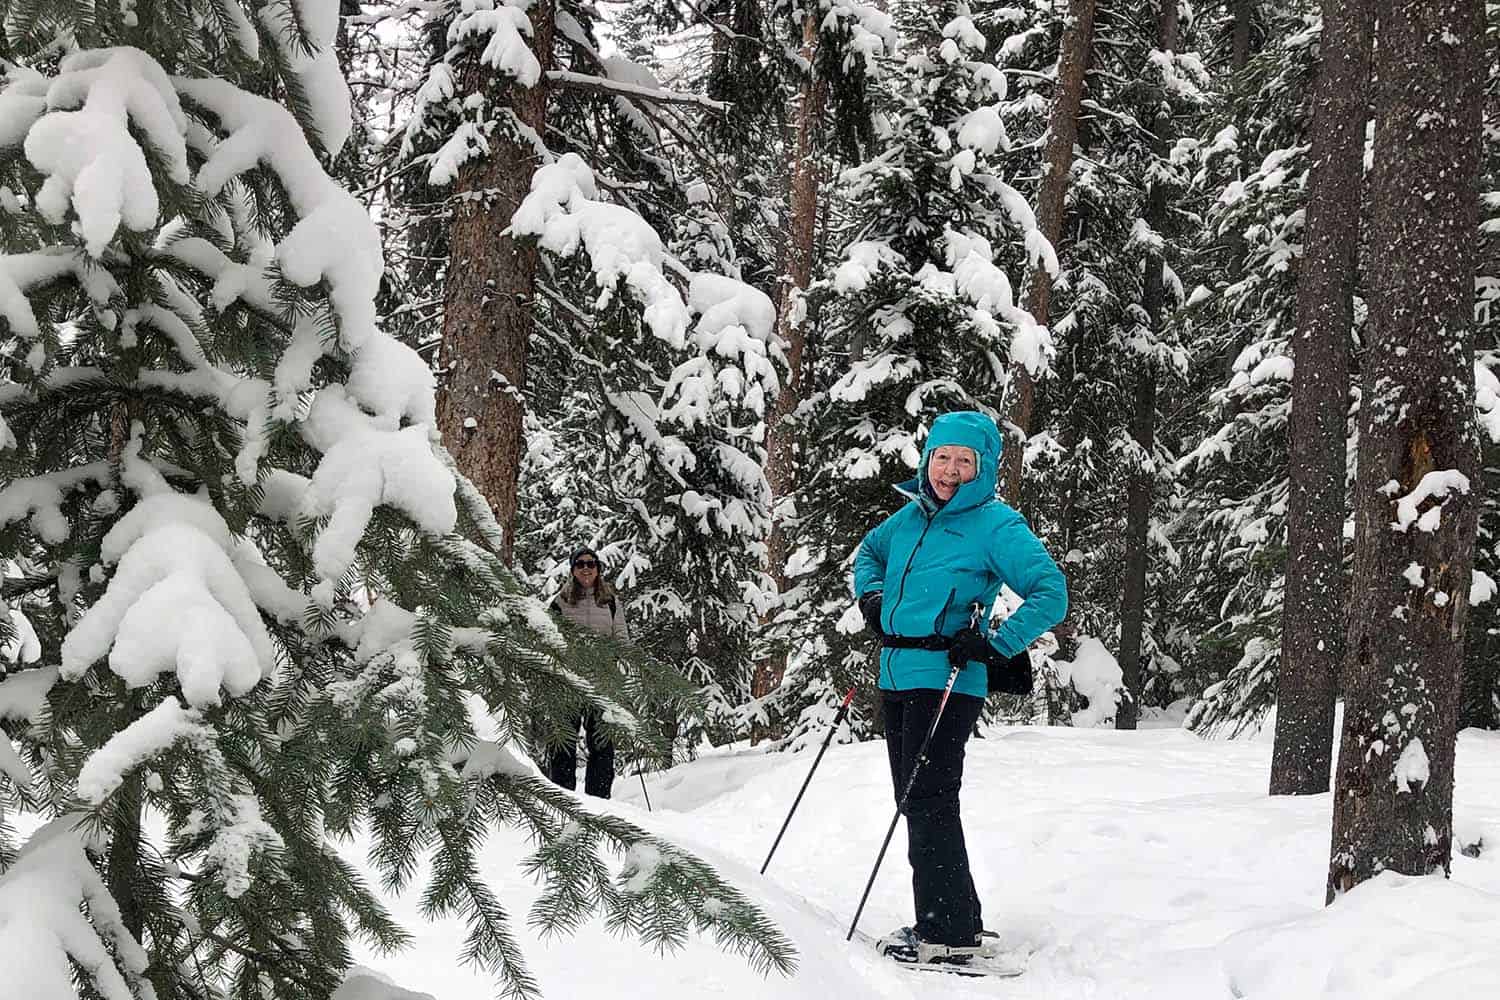 Woman wearing winter coat, holding ski poles, standing in a forest covered with pine trees